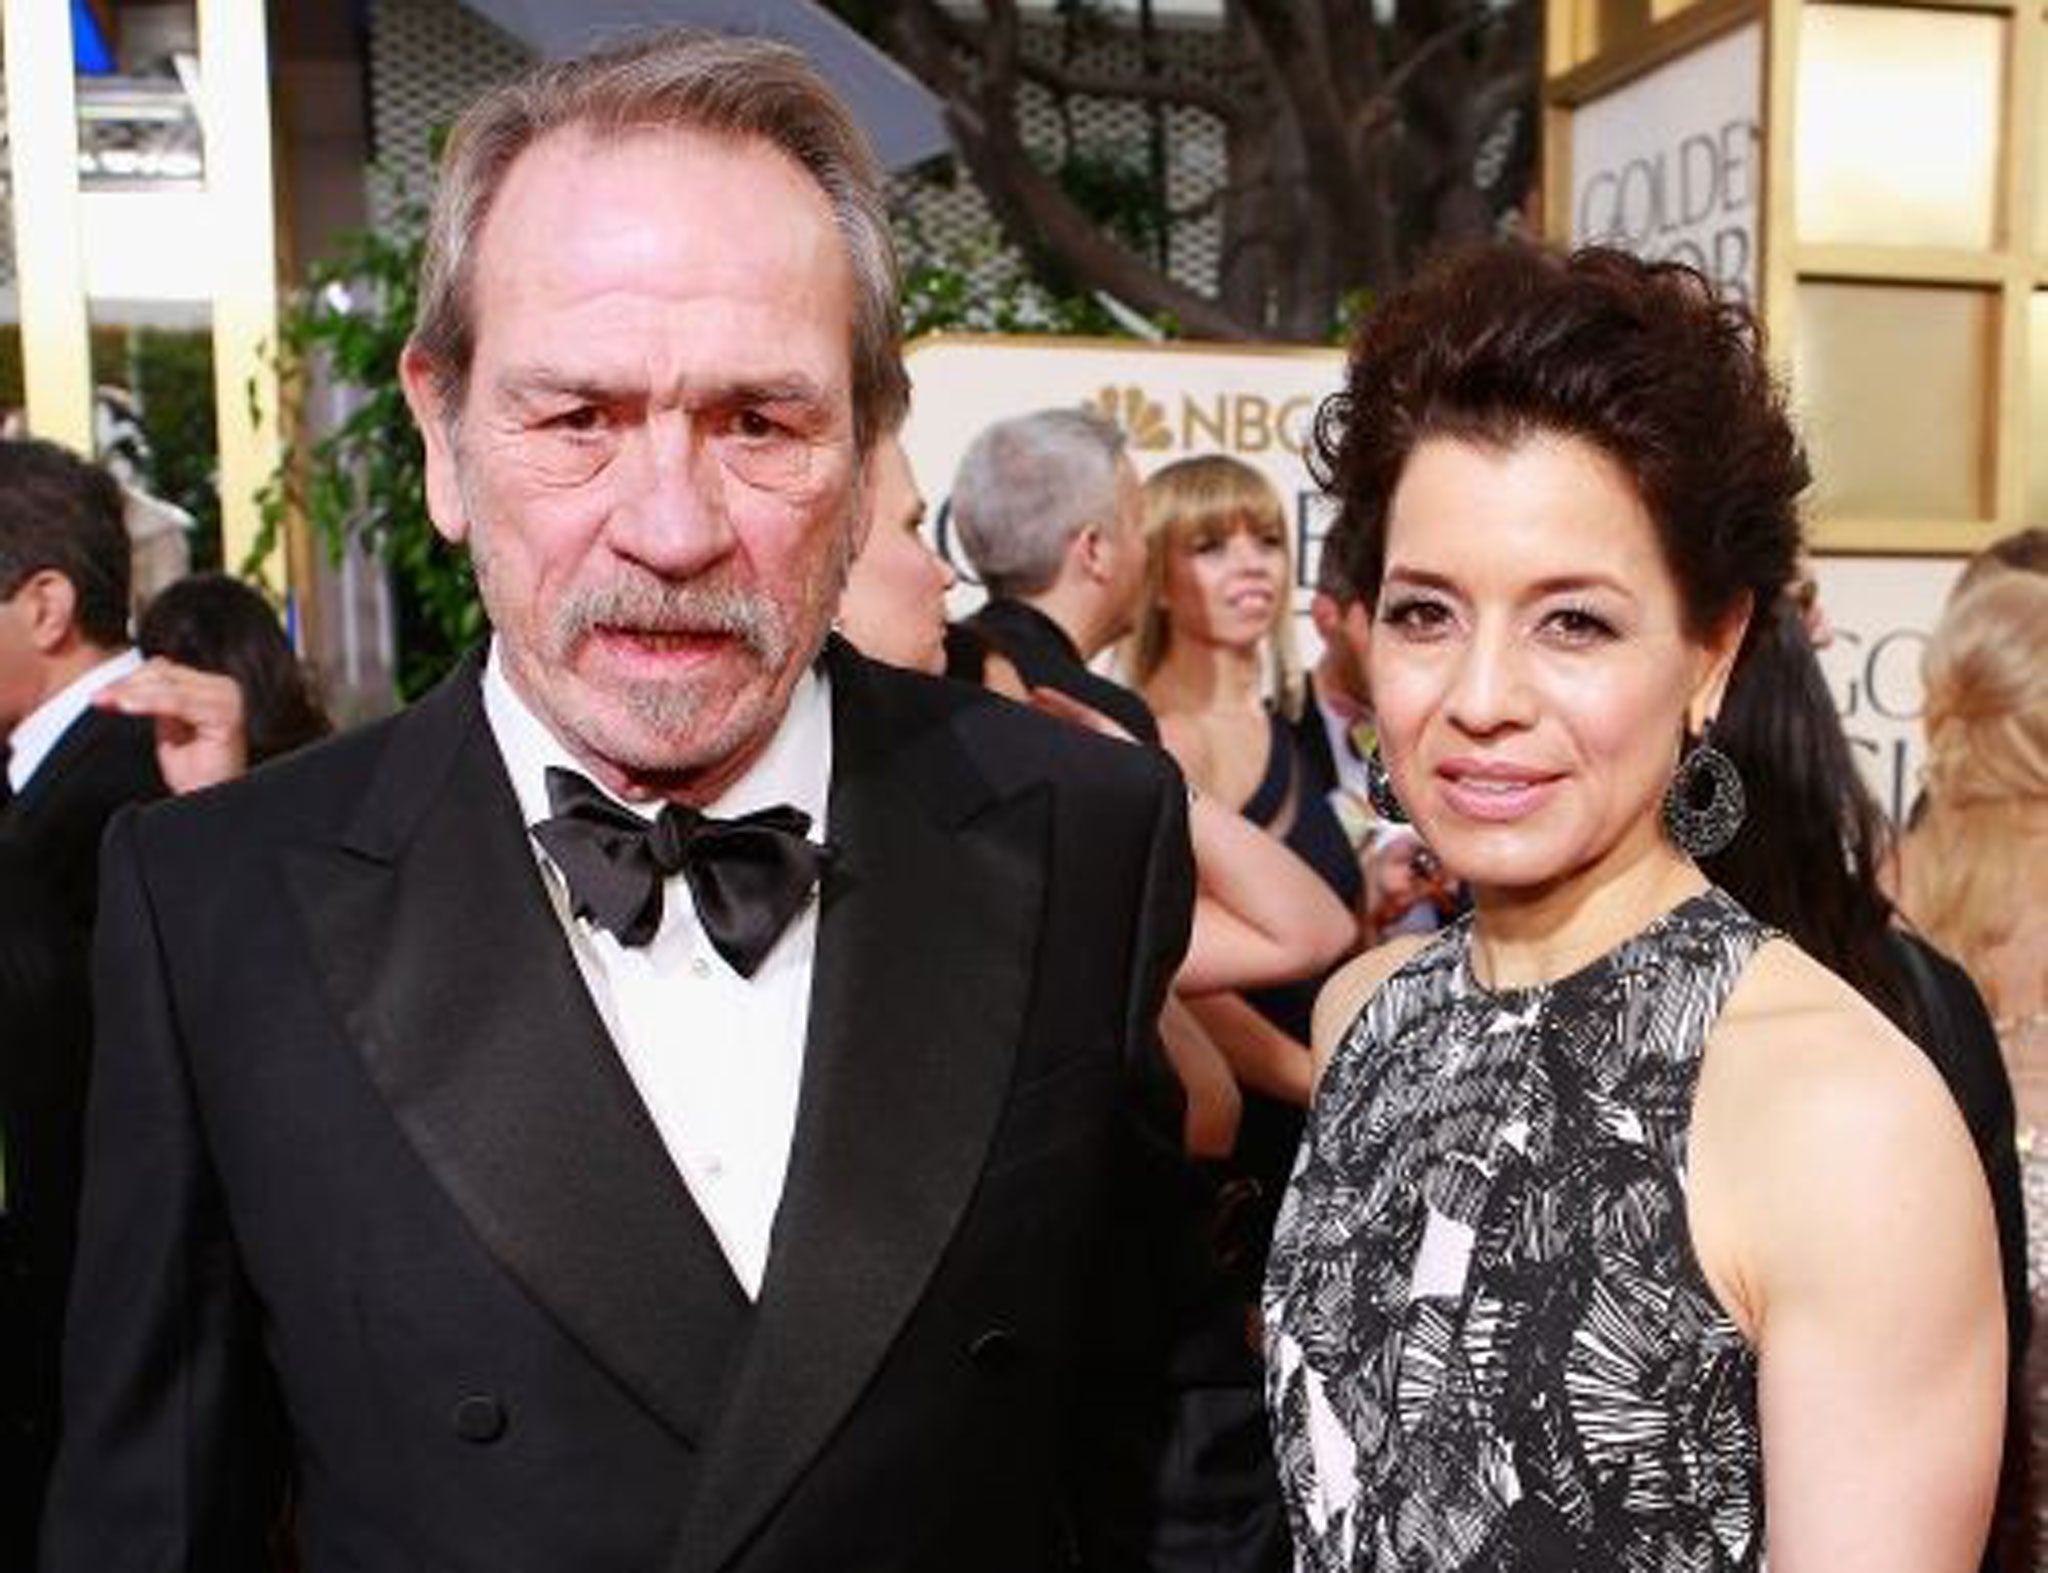 The Award for Best Face at the Golden Globes went to Tommy Lee Jones